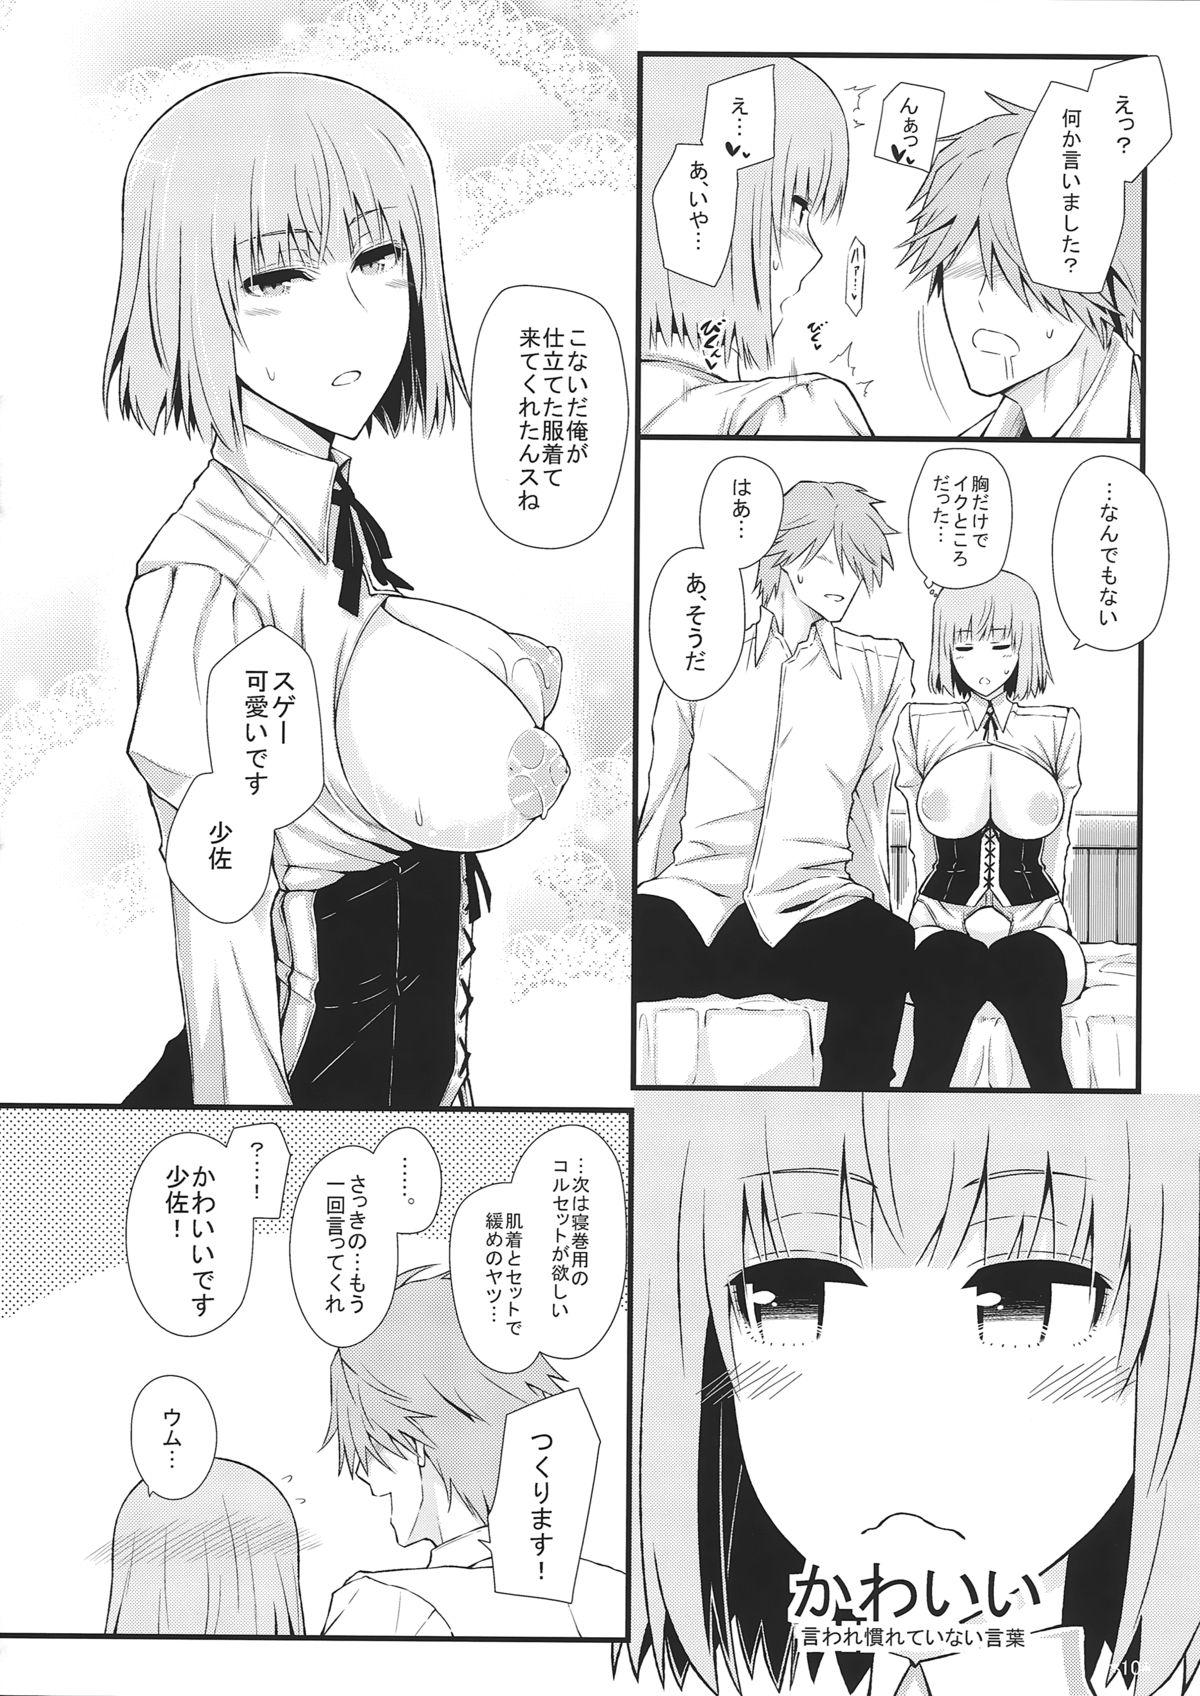 Camgirls KARLSLAND SYNDROME 4 - Strike witches Ex Girlfriends - Page 12